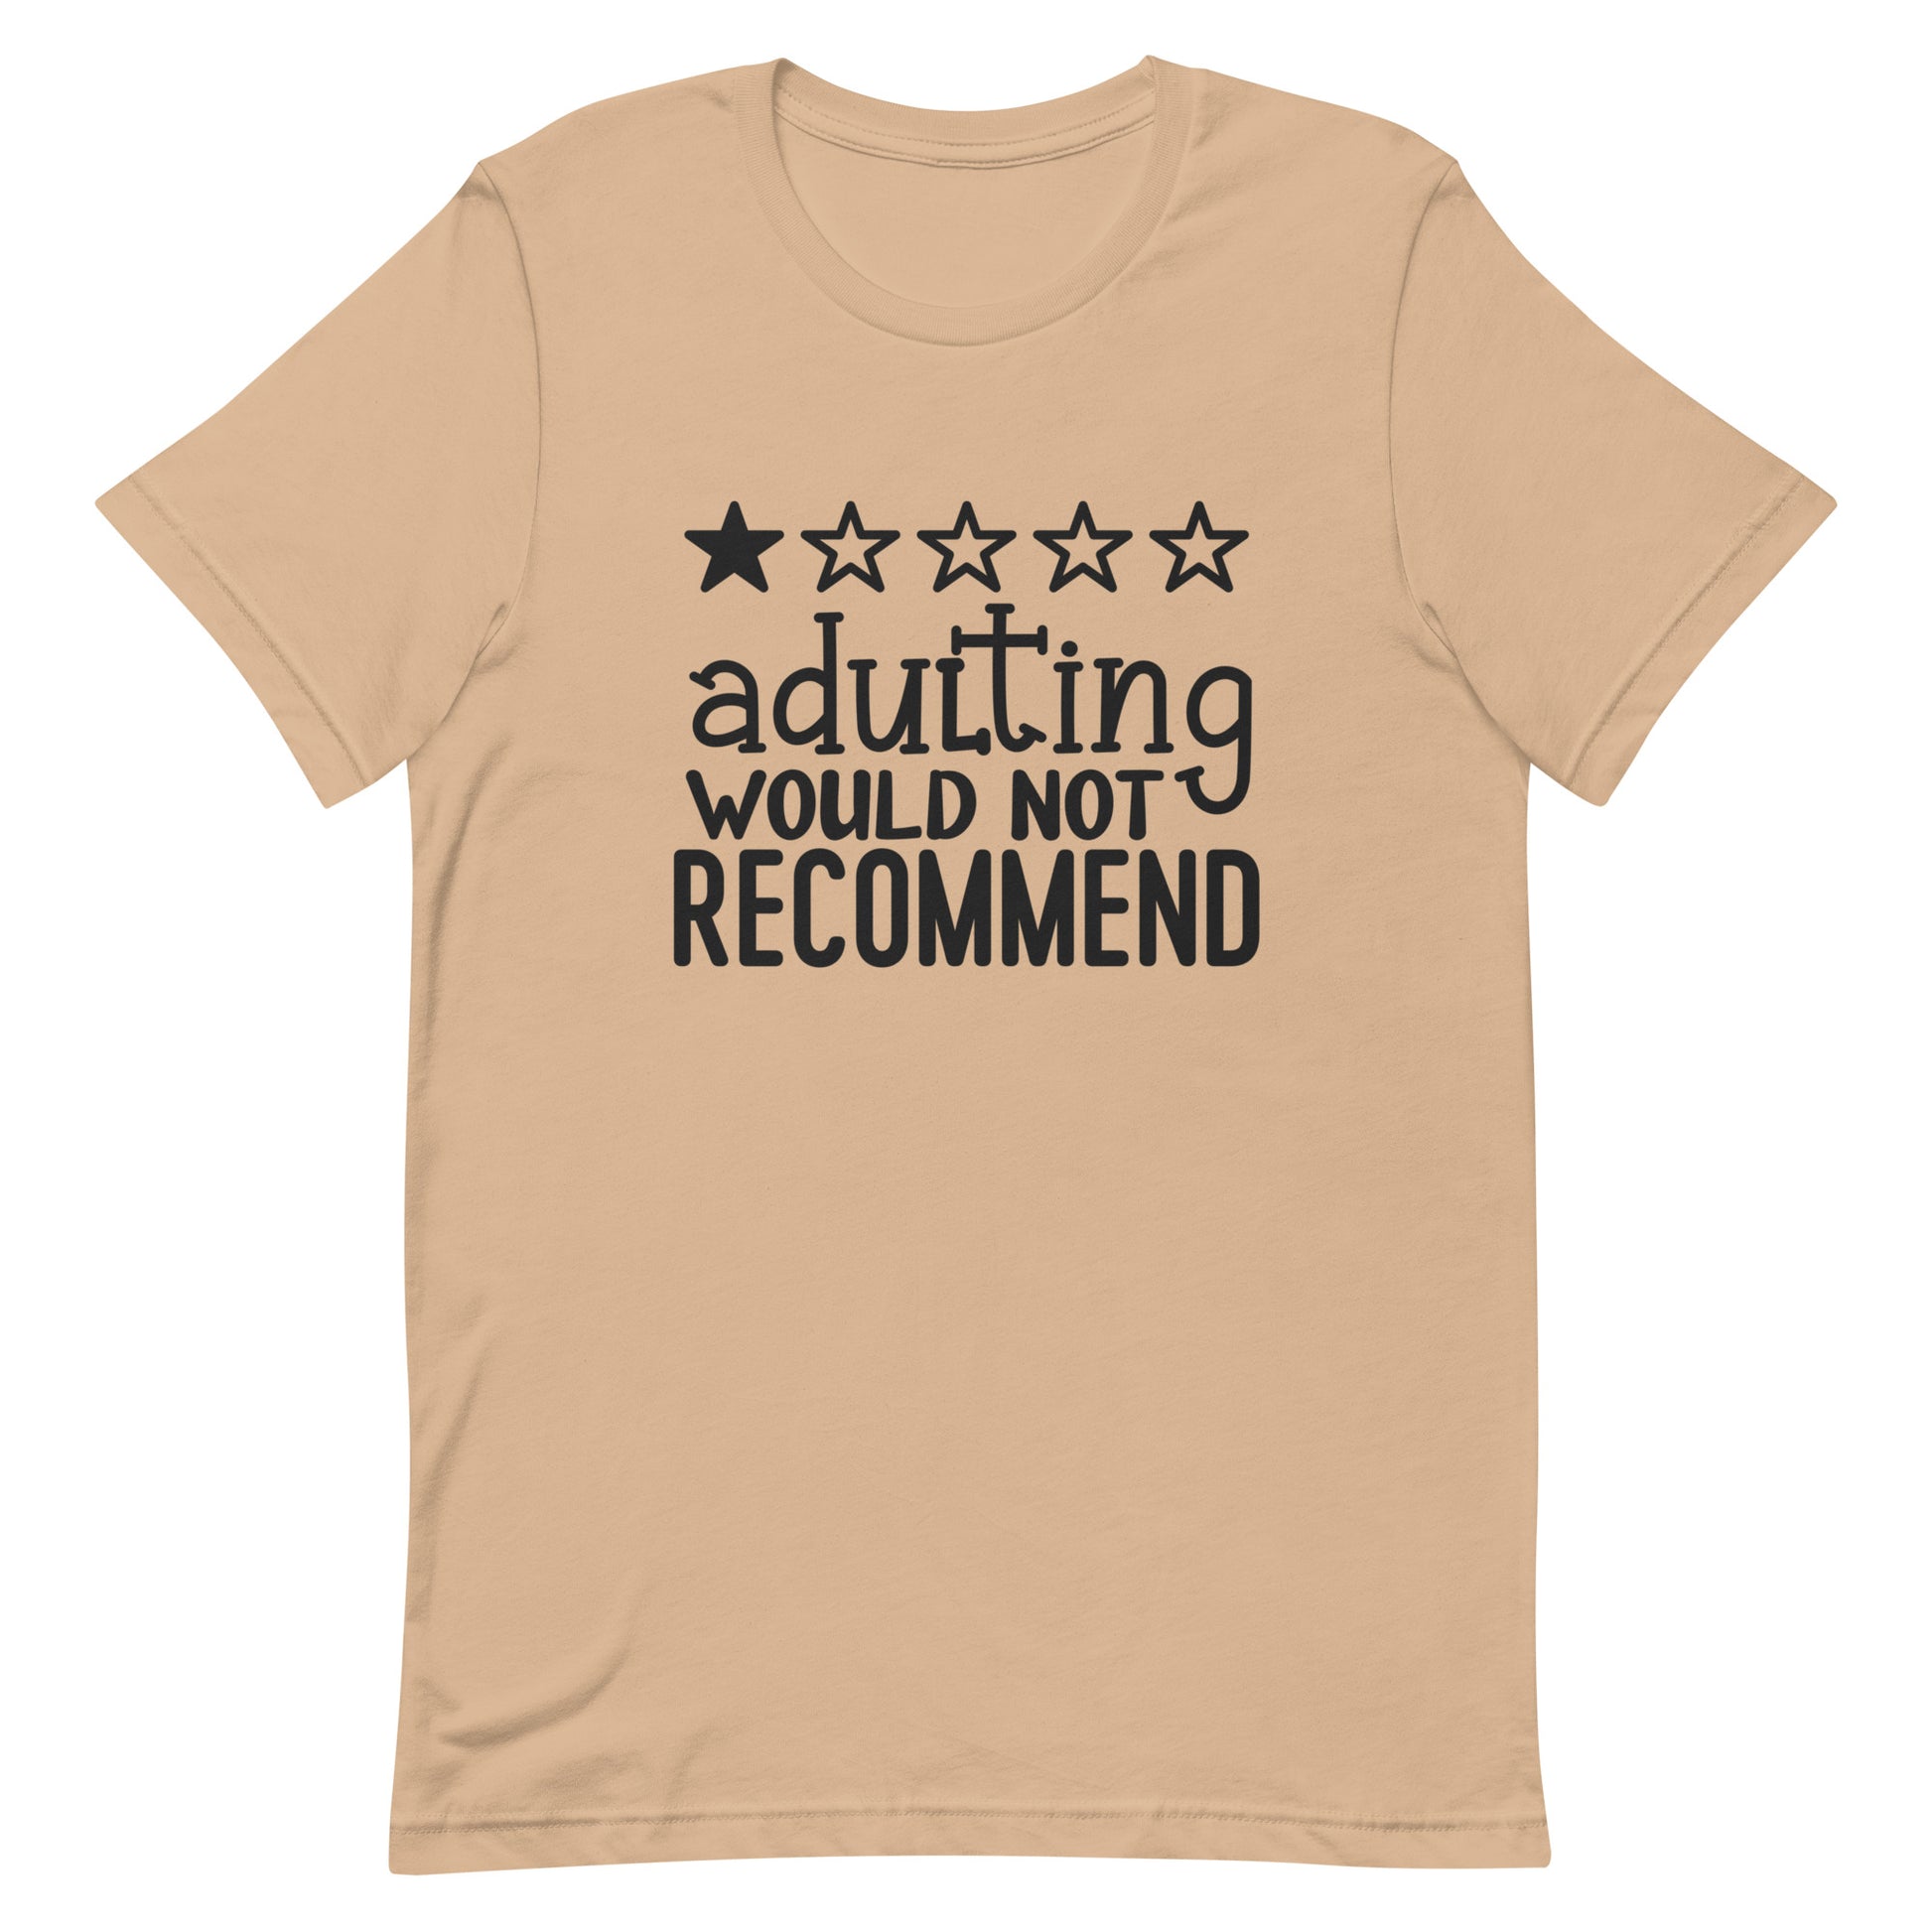 Adulting Would Not Recommend Tshirt